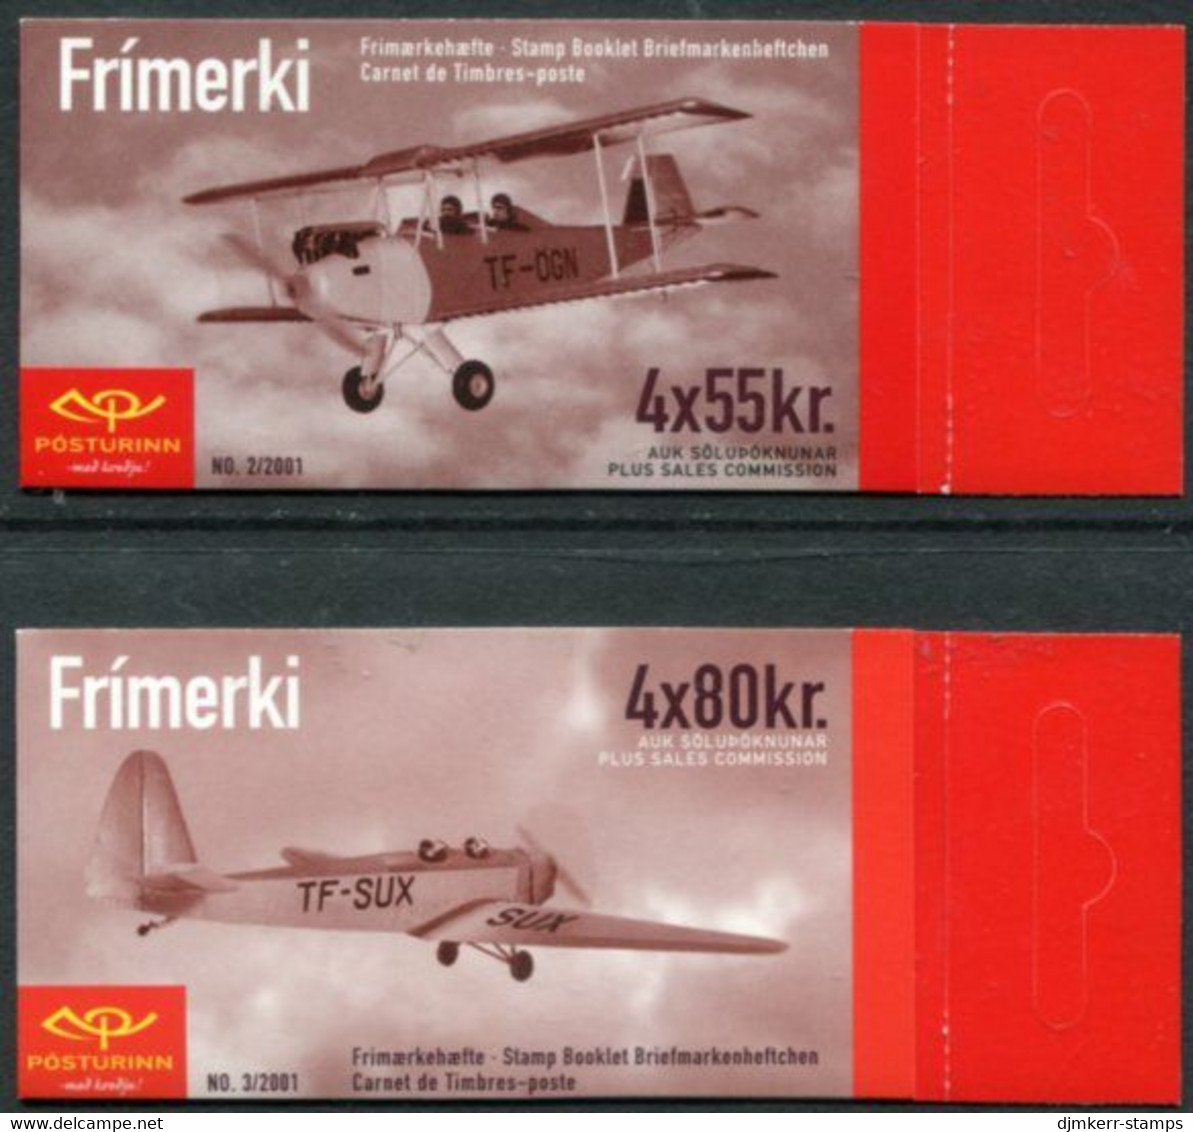 ICELAND  2001 Historic Aircraft Booklets Cancelled.  Michel 979-80 MH - Booklets